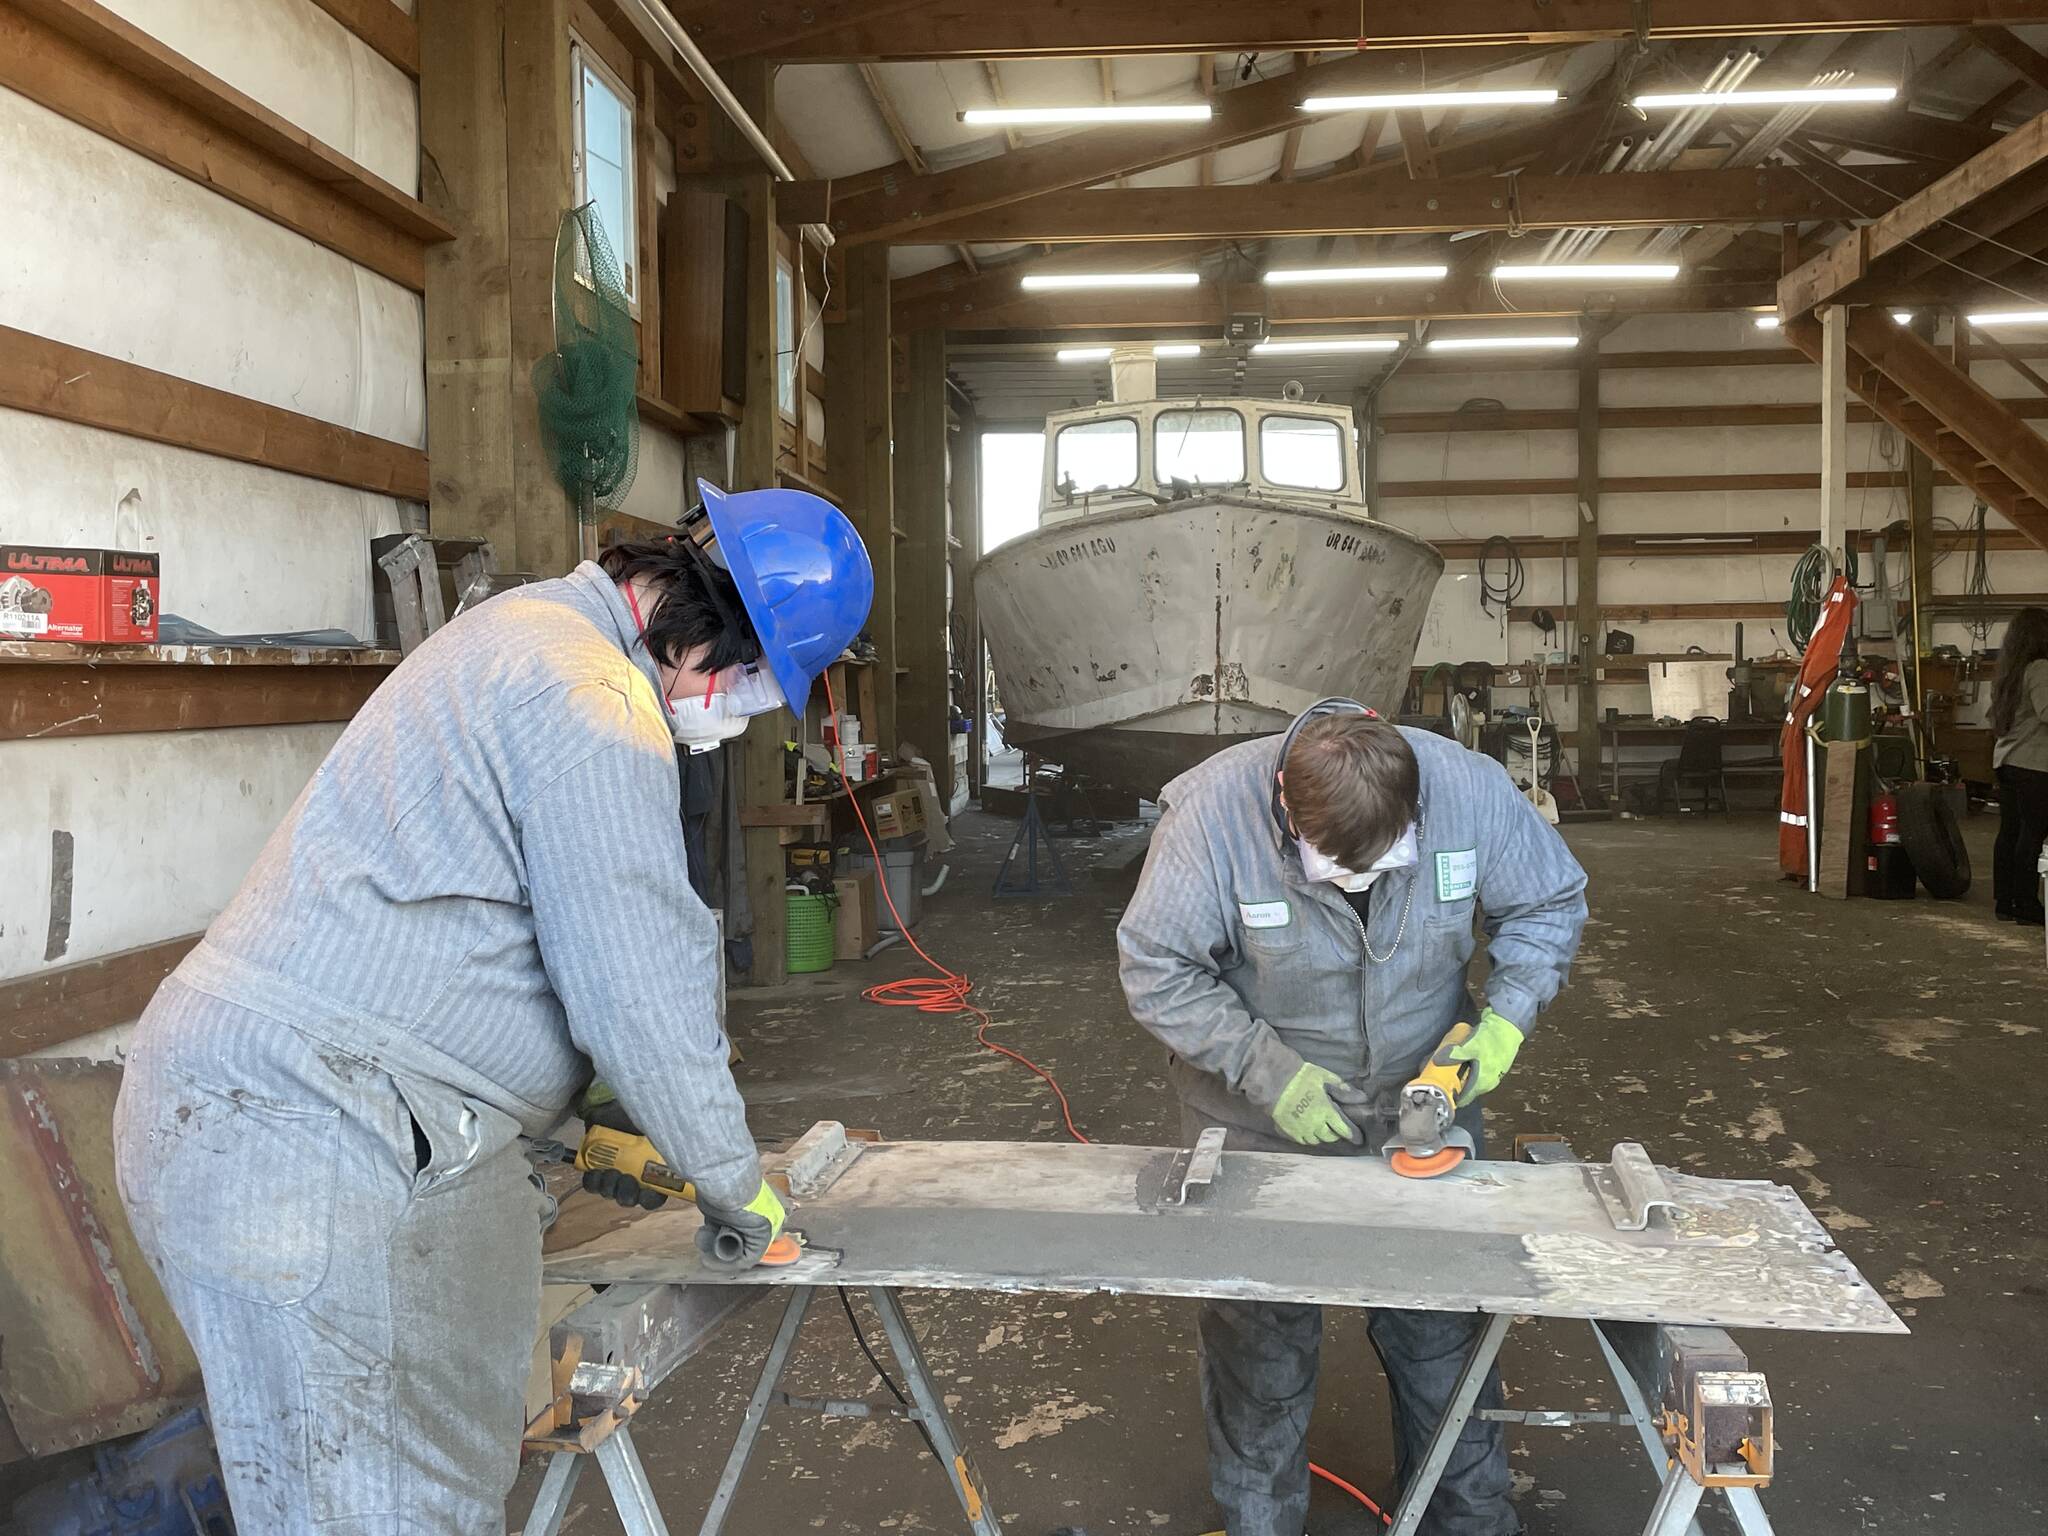 Evan Brockhoff and Logan Slosson, students with the Ocosta High School’s Maritime afterschool program, buff out a deckplate as part of a boat restoration on Nov. 9. (Michael S. Lockett / The Daily World)